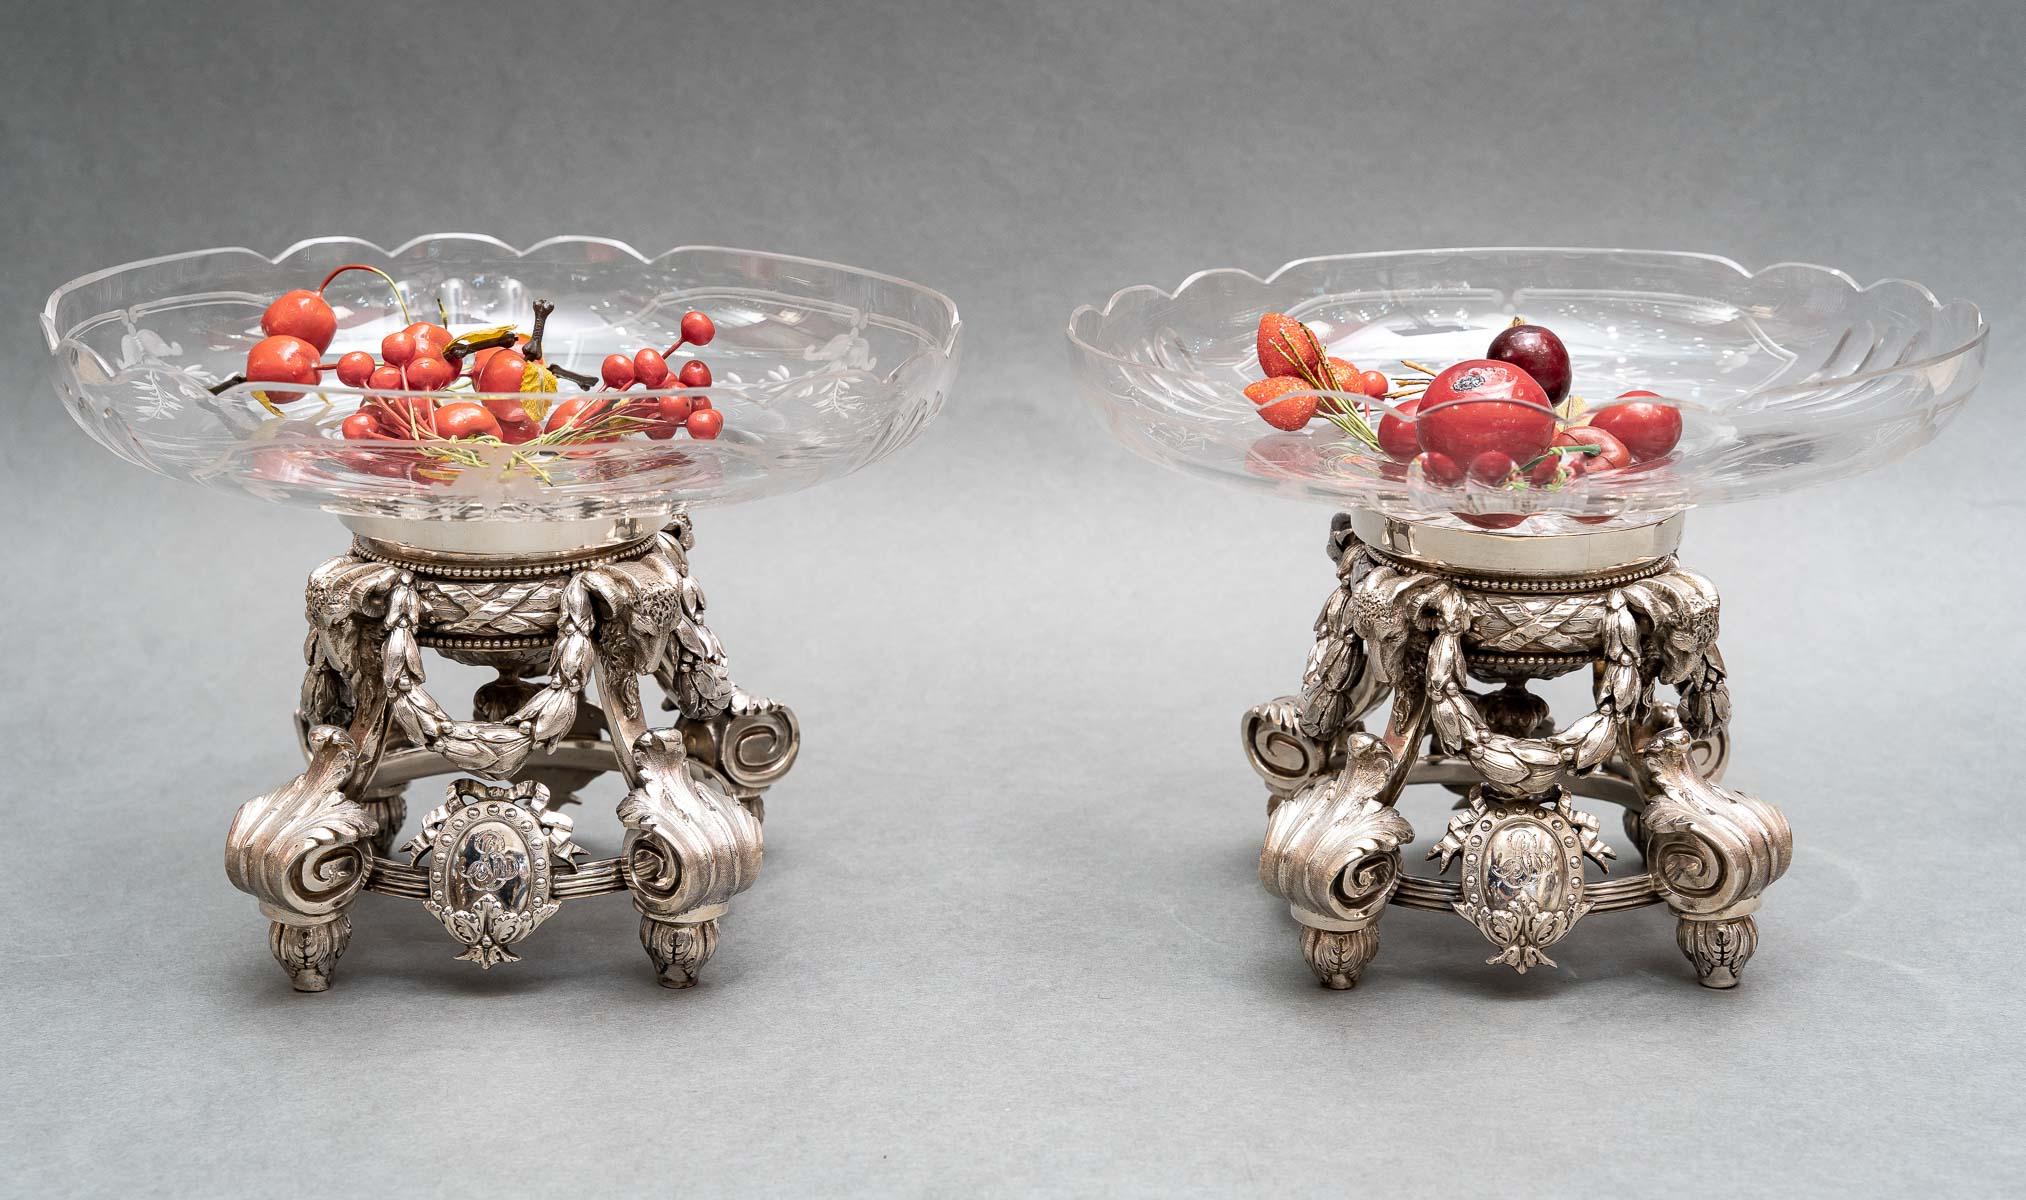 Pair of silver cups decorated with rams' heads connected by laurel wreaths, the four winding feet are covered with a large acanthus leaf and on each side is a Louis XVI style cartouche engraved with a monogram . The whole is topped with a